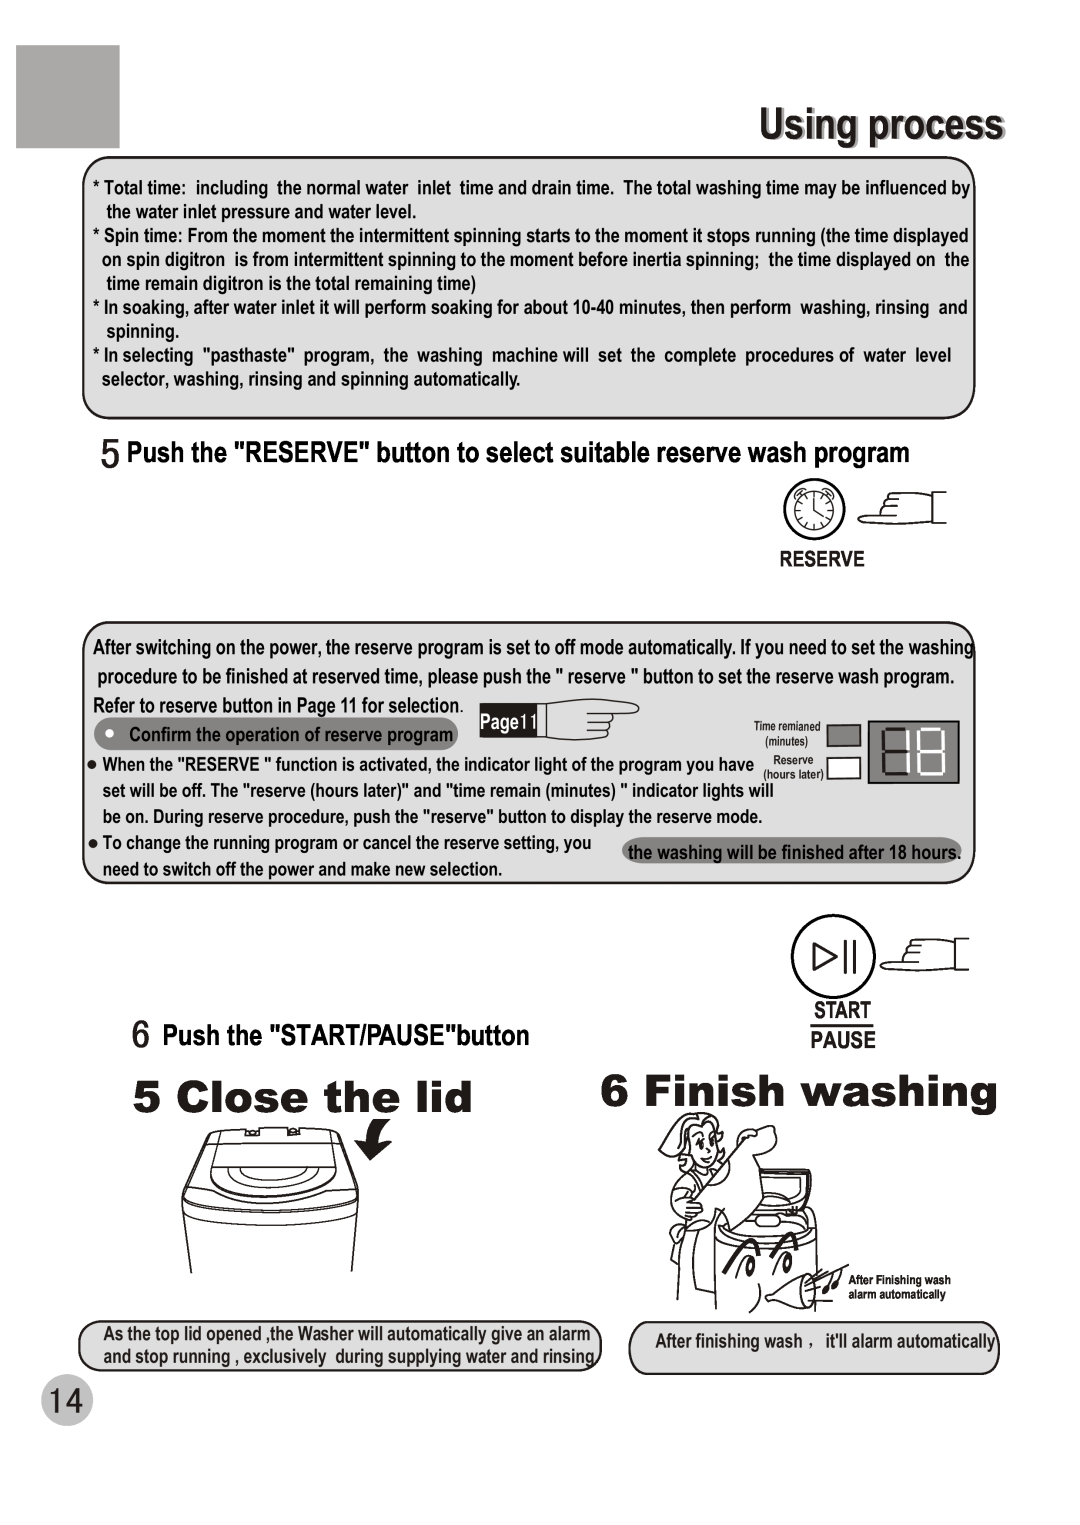 Haier WM6002A Close the lid, Push the RESERVE button to select suitable reserve wash program, Push the START/PAUSEbutton 